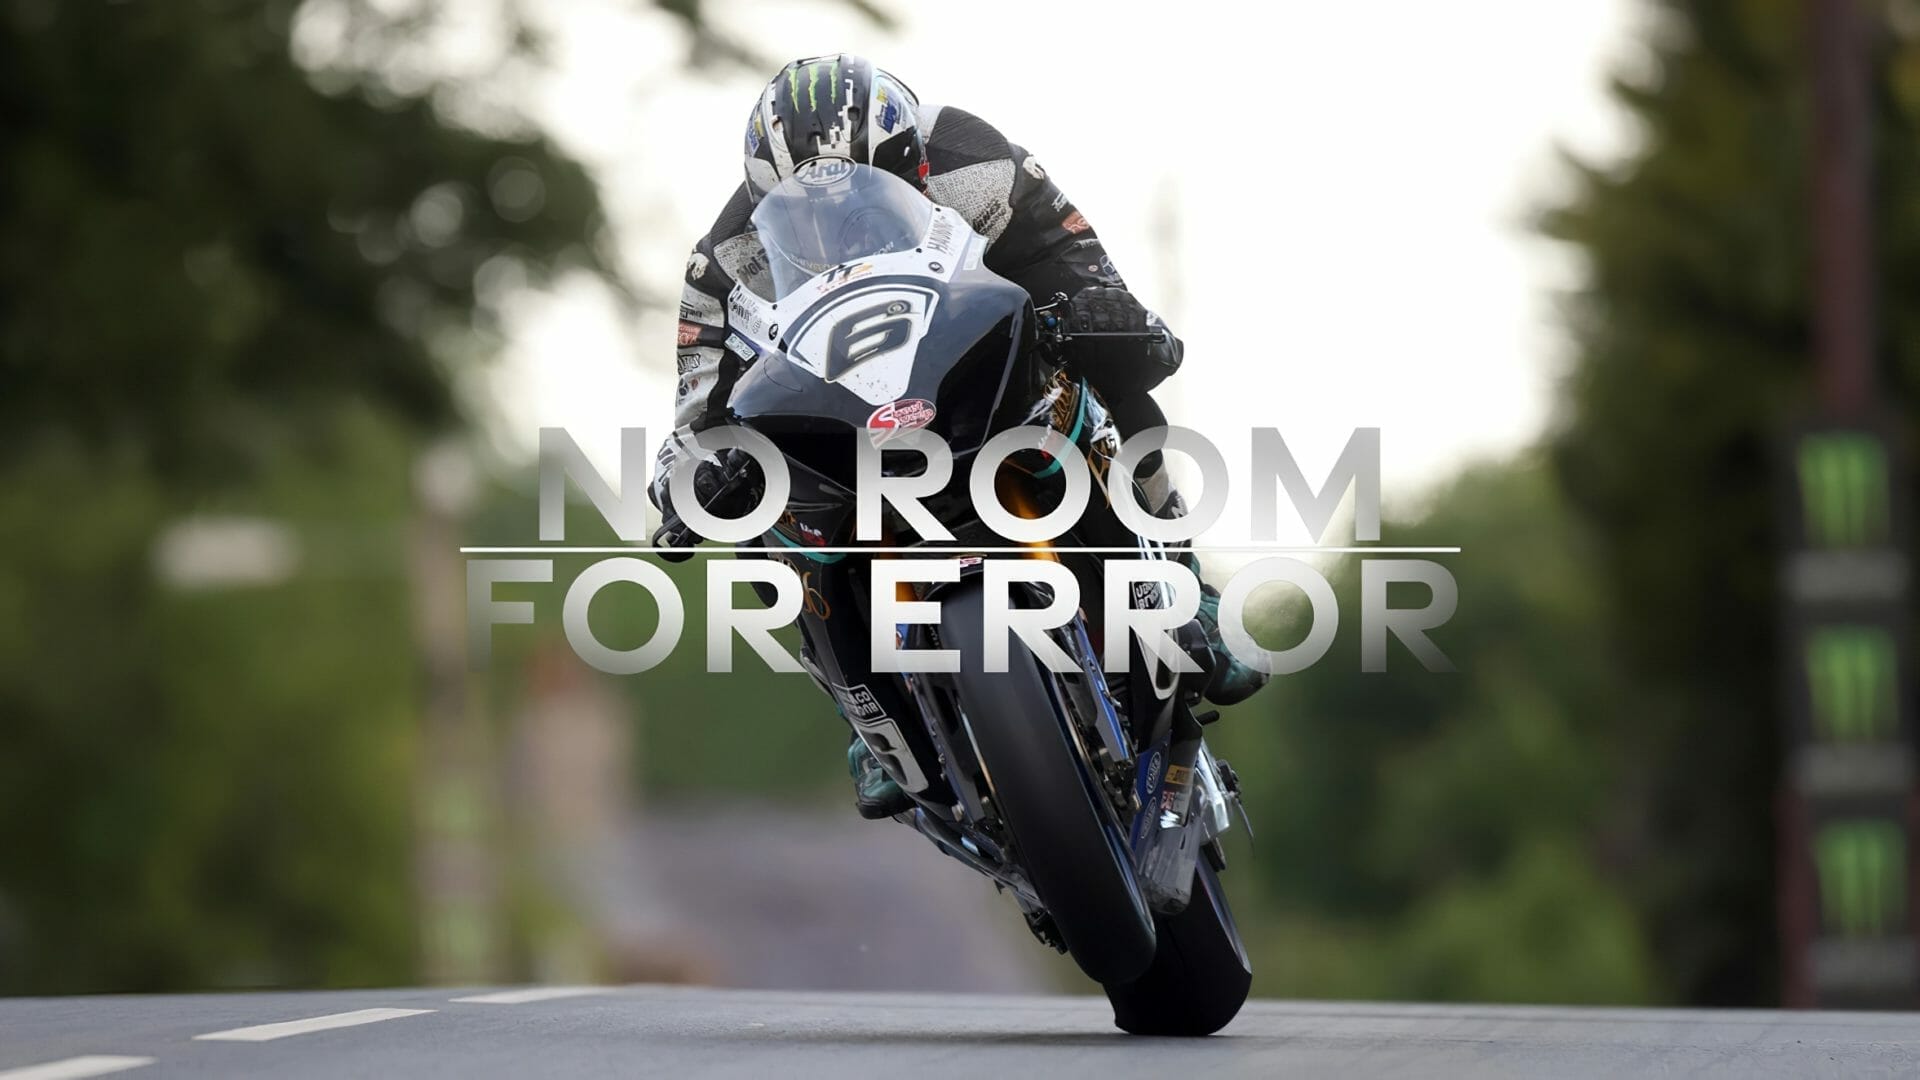 The unvarnished truth of the TT: ‘No Room For Error’ tells the stories behind the ultimate road race